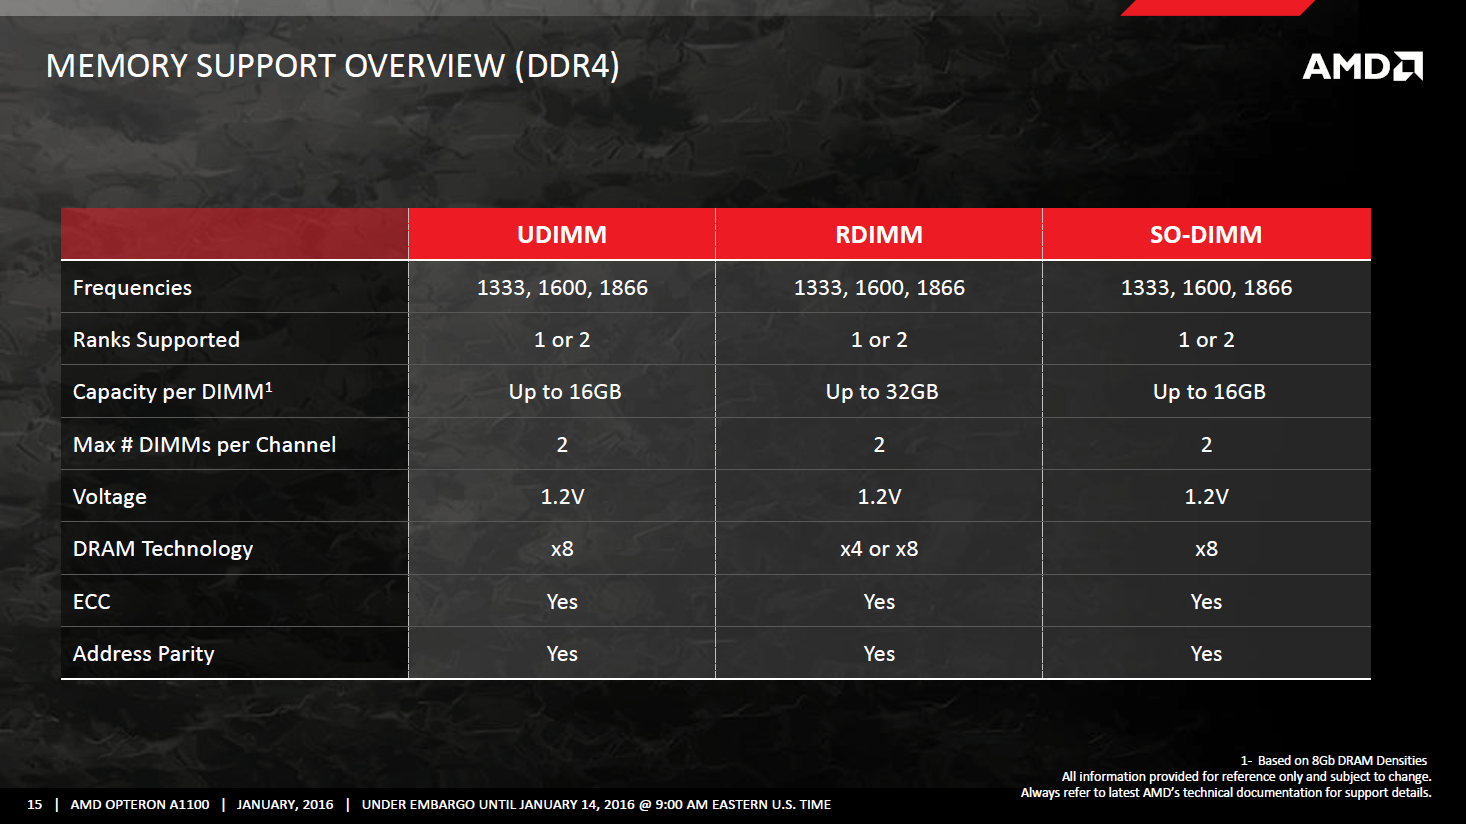 AMD Opteron A1100-Serie mit ARM